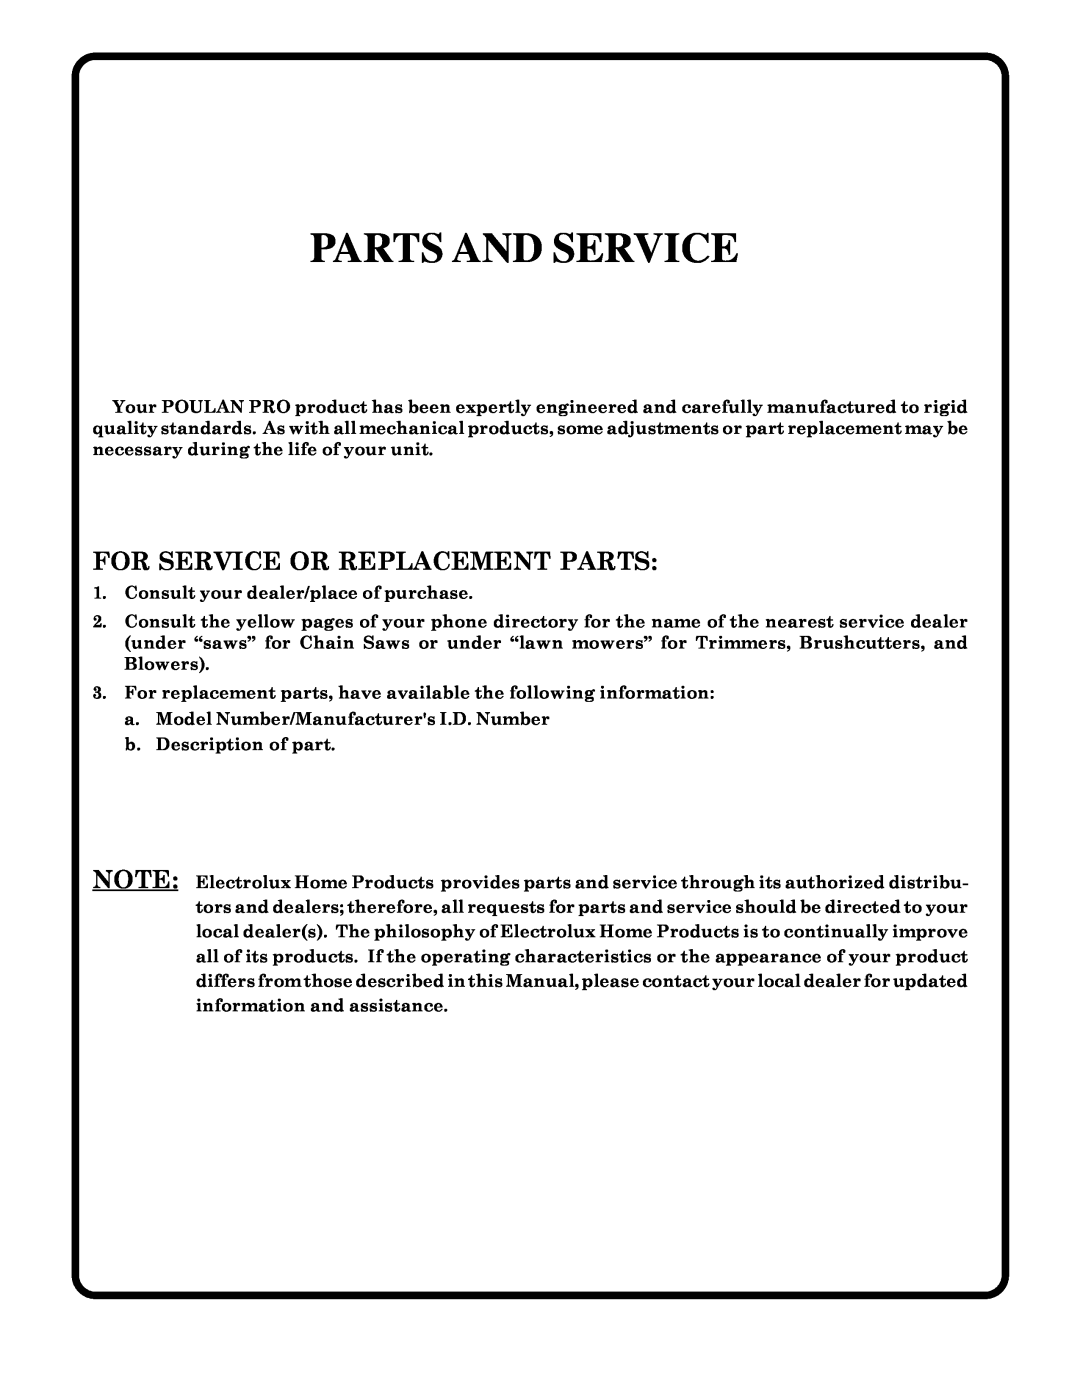 Poulan 178497 owner manual Parts And Service, For Service Or Replacement Parts 